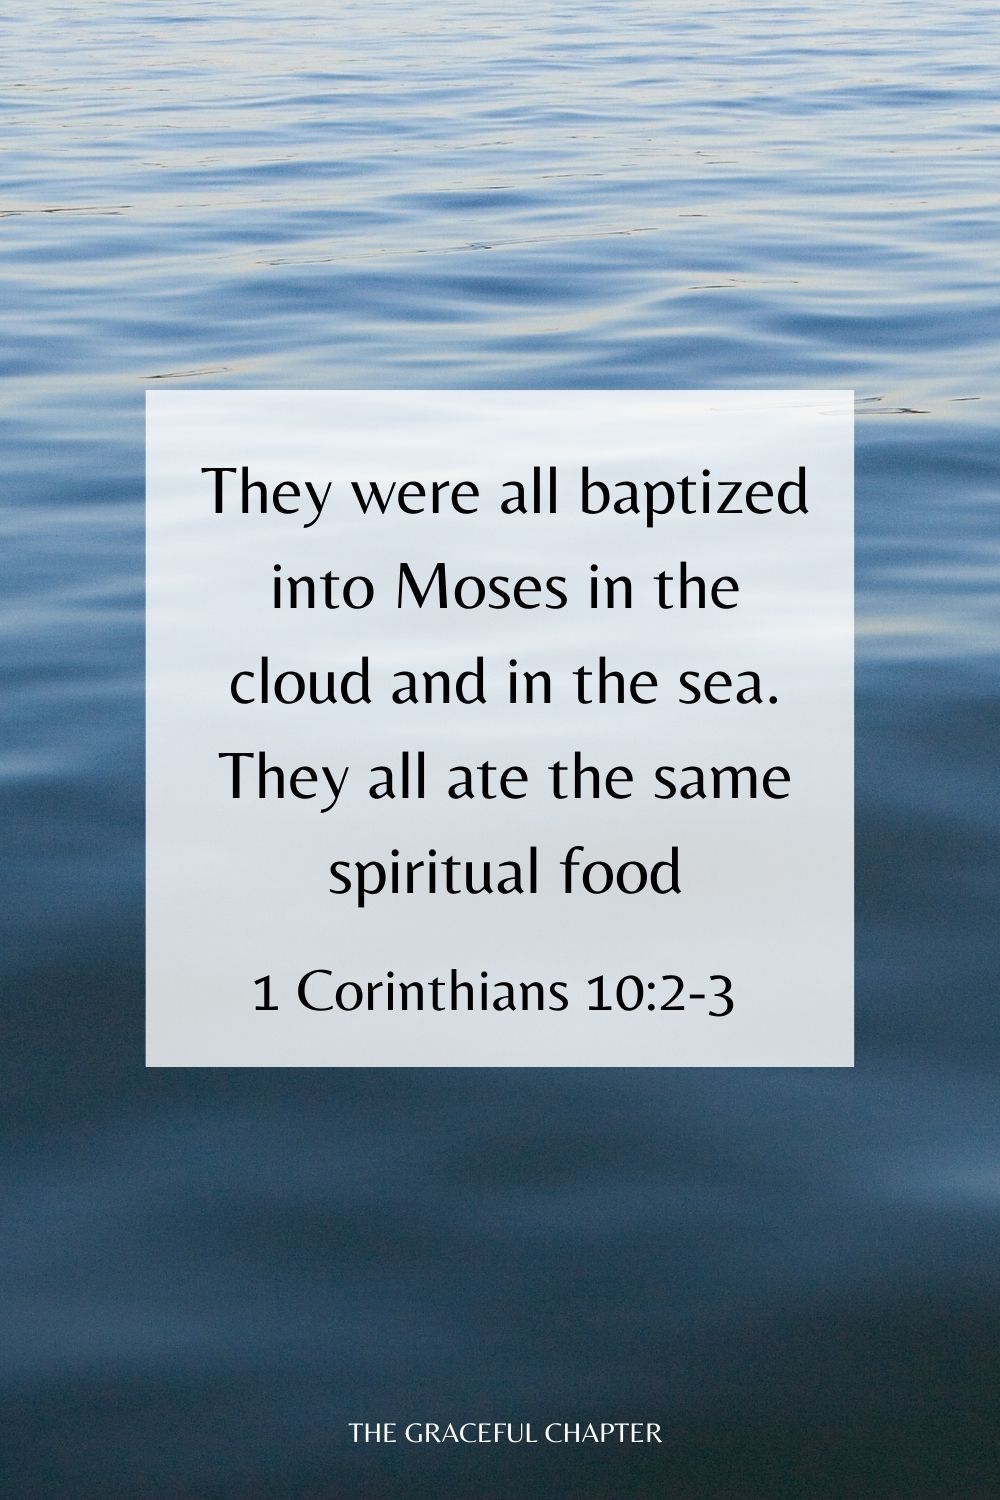 They were all baptized into Moses in the cloud and in the sea. They all ate the same spiritual food. 1 Corinthians 10:2-3